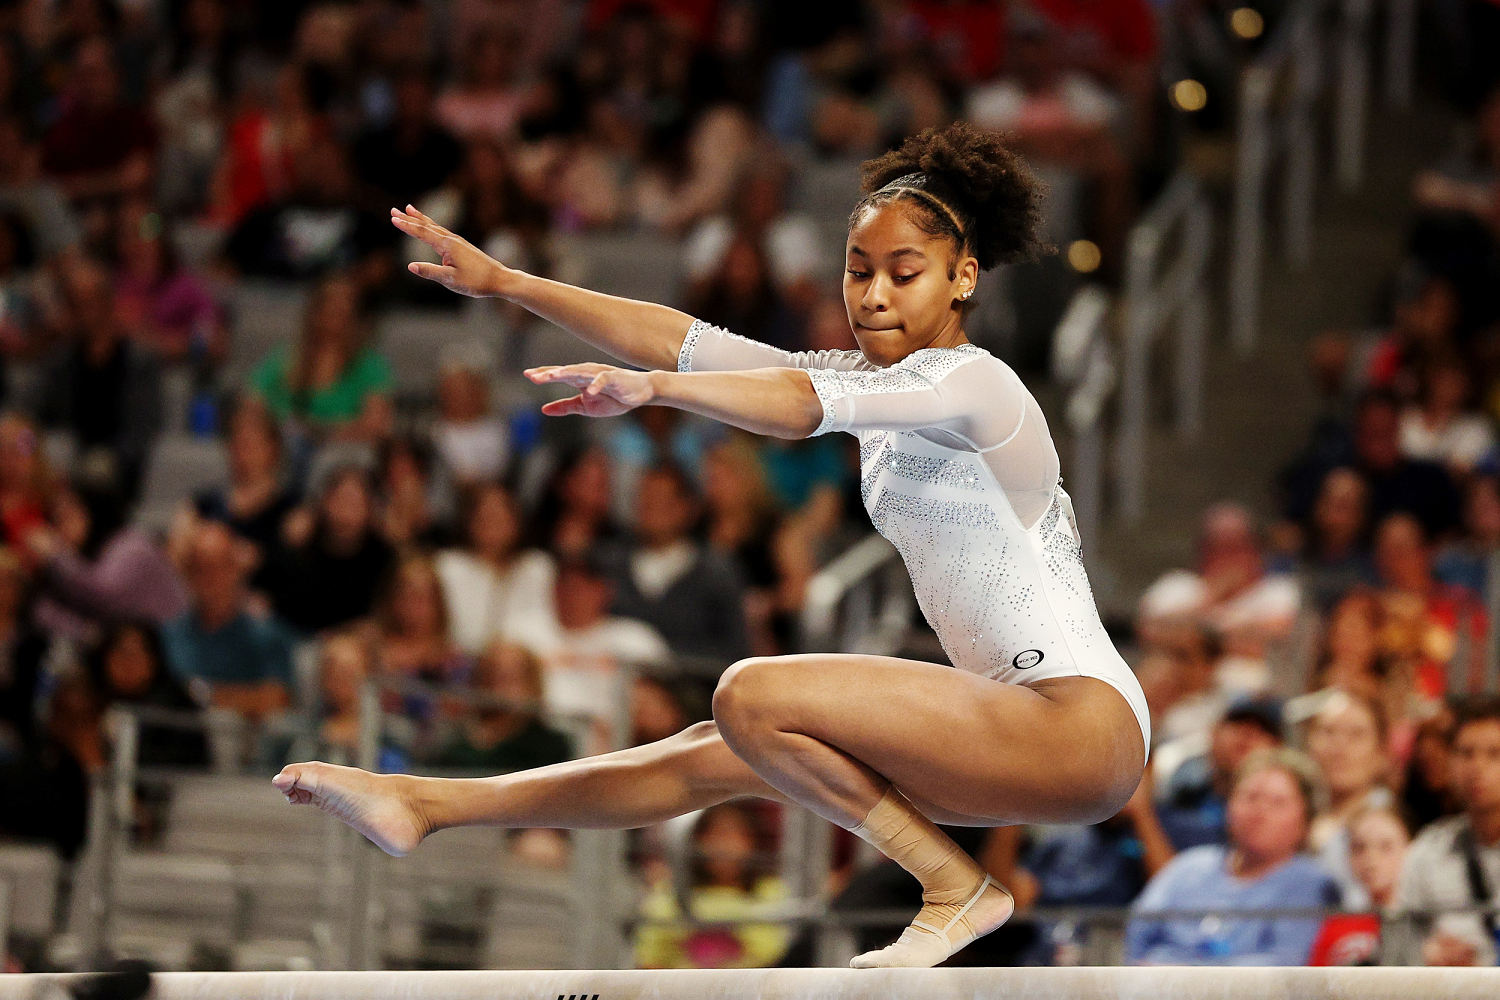 Skye Blakely withdraws from U.S. Olympic gymnastics trials after suffering an Achilles injury